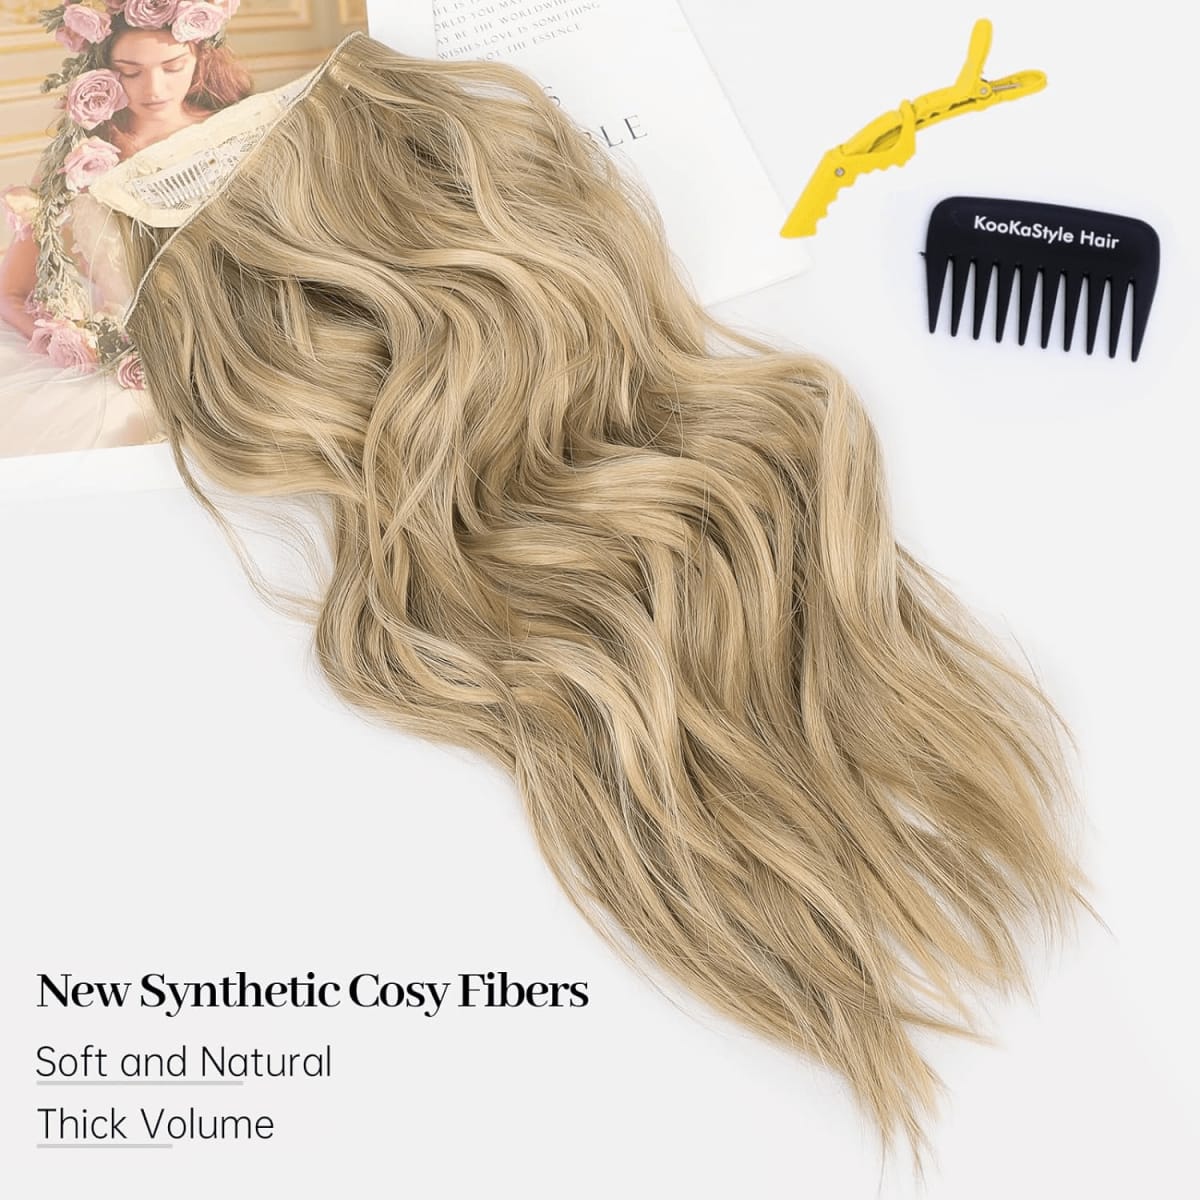 Invisible Wire Hair Extensions - 20 BEST Amazon Purchases Of All Time ...